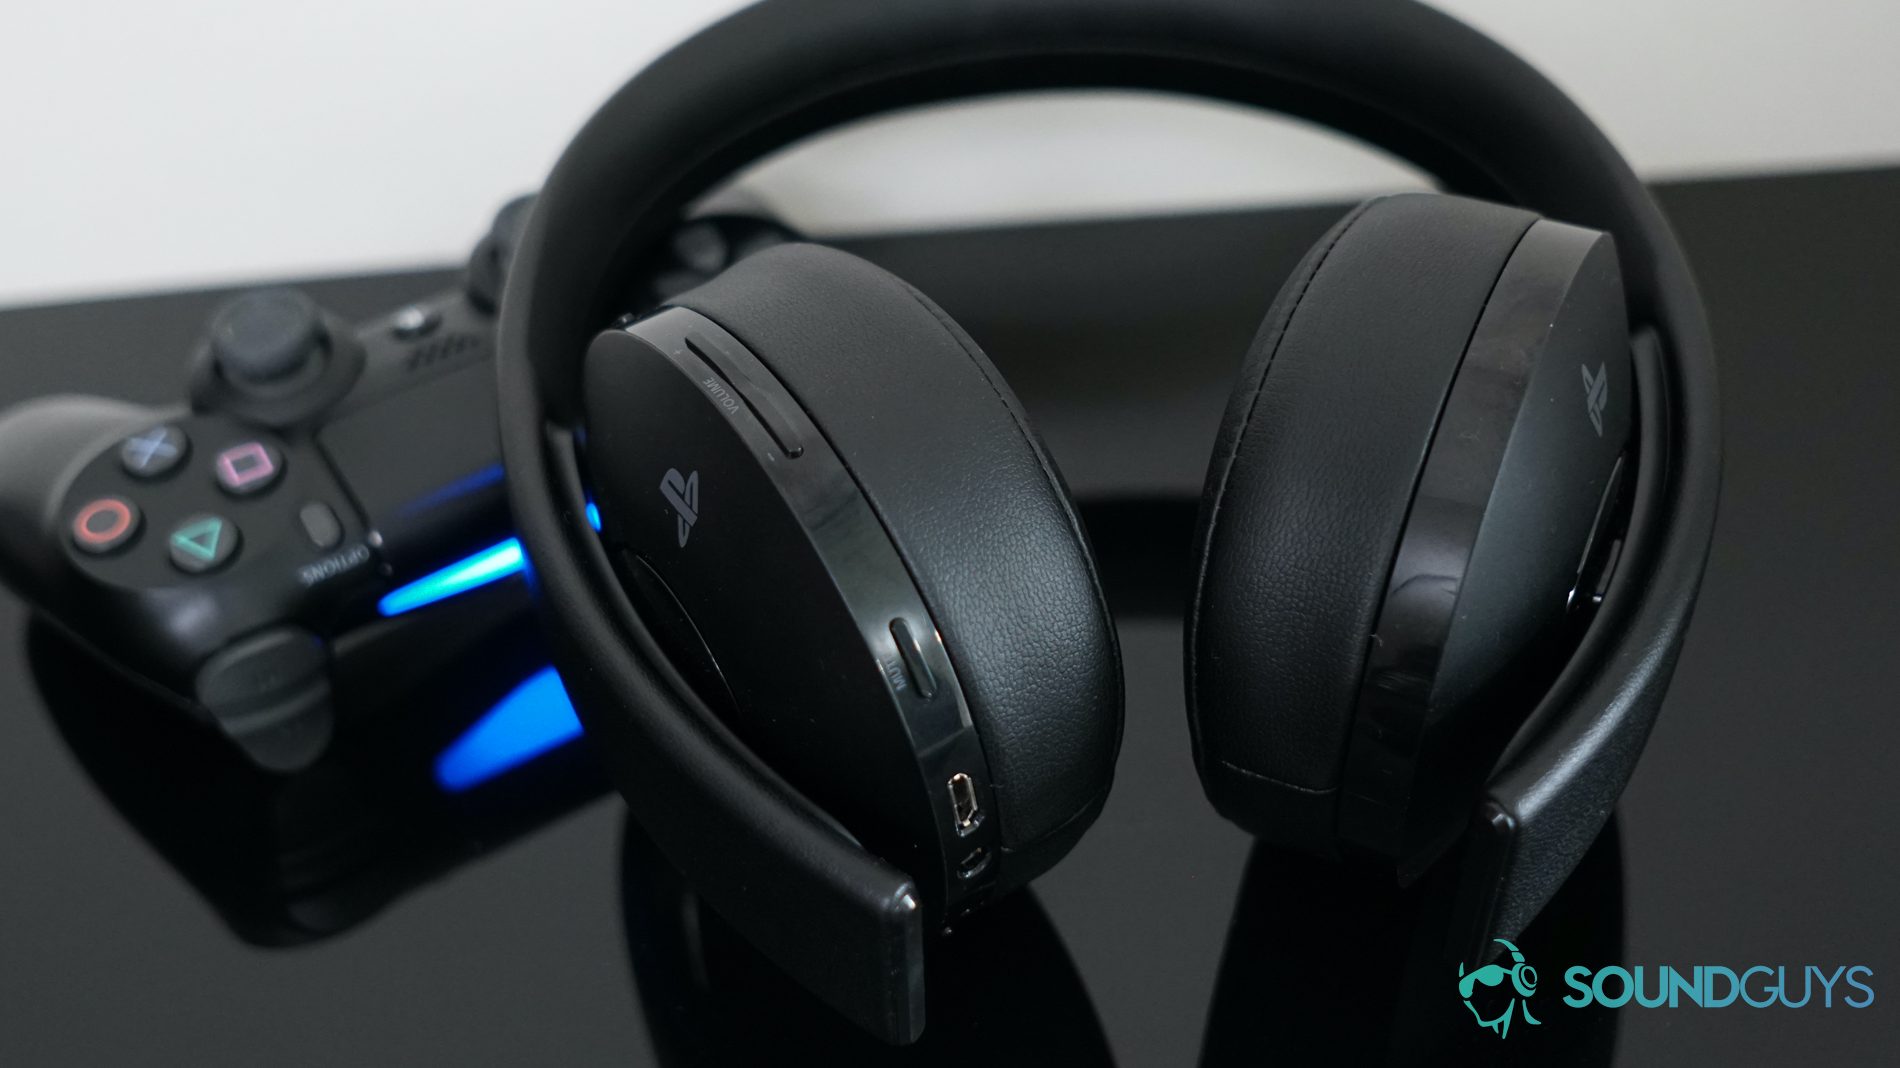 Playstation Gold Wireless Headset leans on a Playstation 4 controller